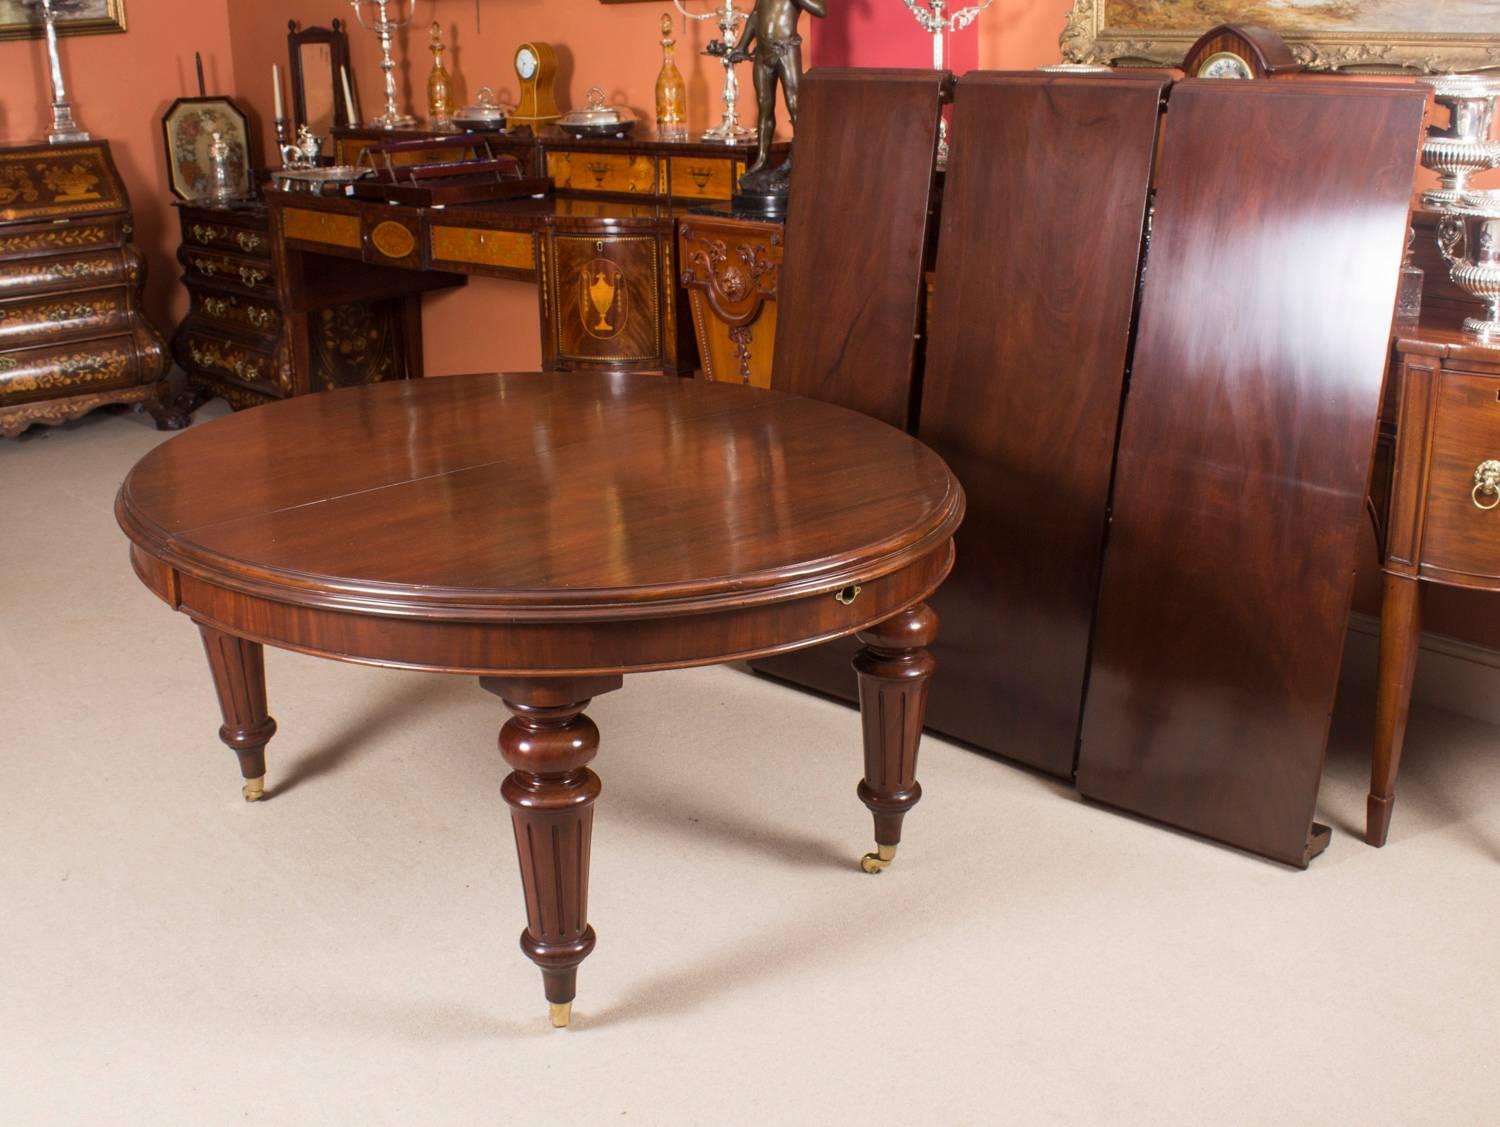 Hand-Crafted Antique Victorian Oval Flame Mahogany Extending Dining Table, 19th Century